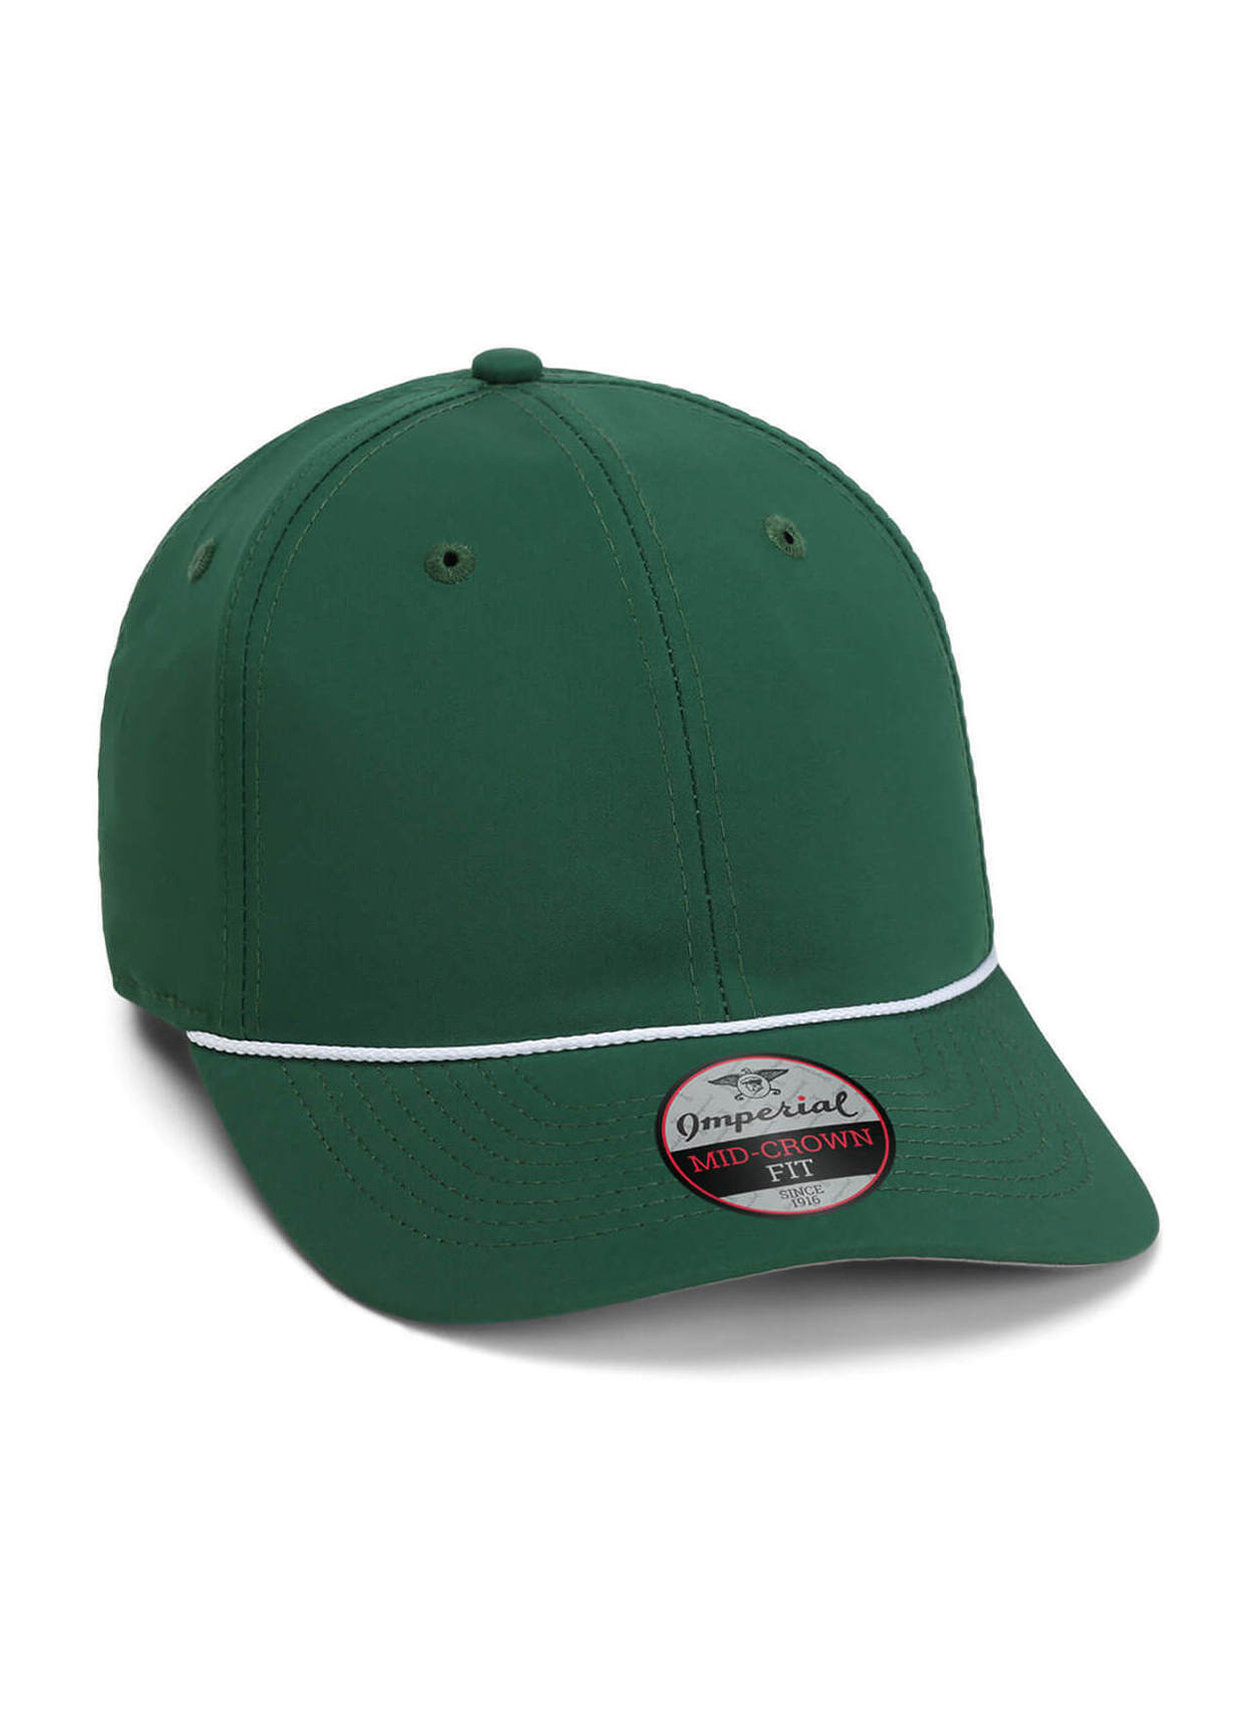 Imperial Forest Green / White Rope The Wingman 6-Panel Performance Rope Hat